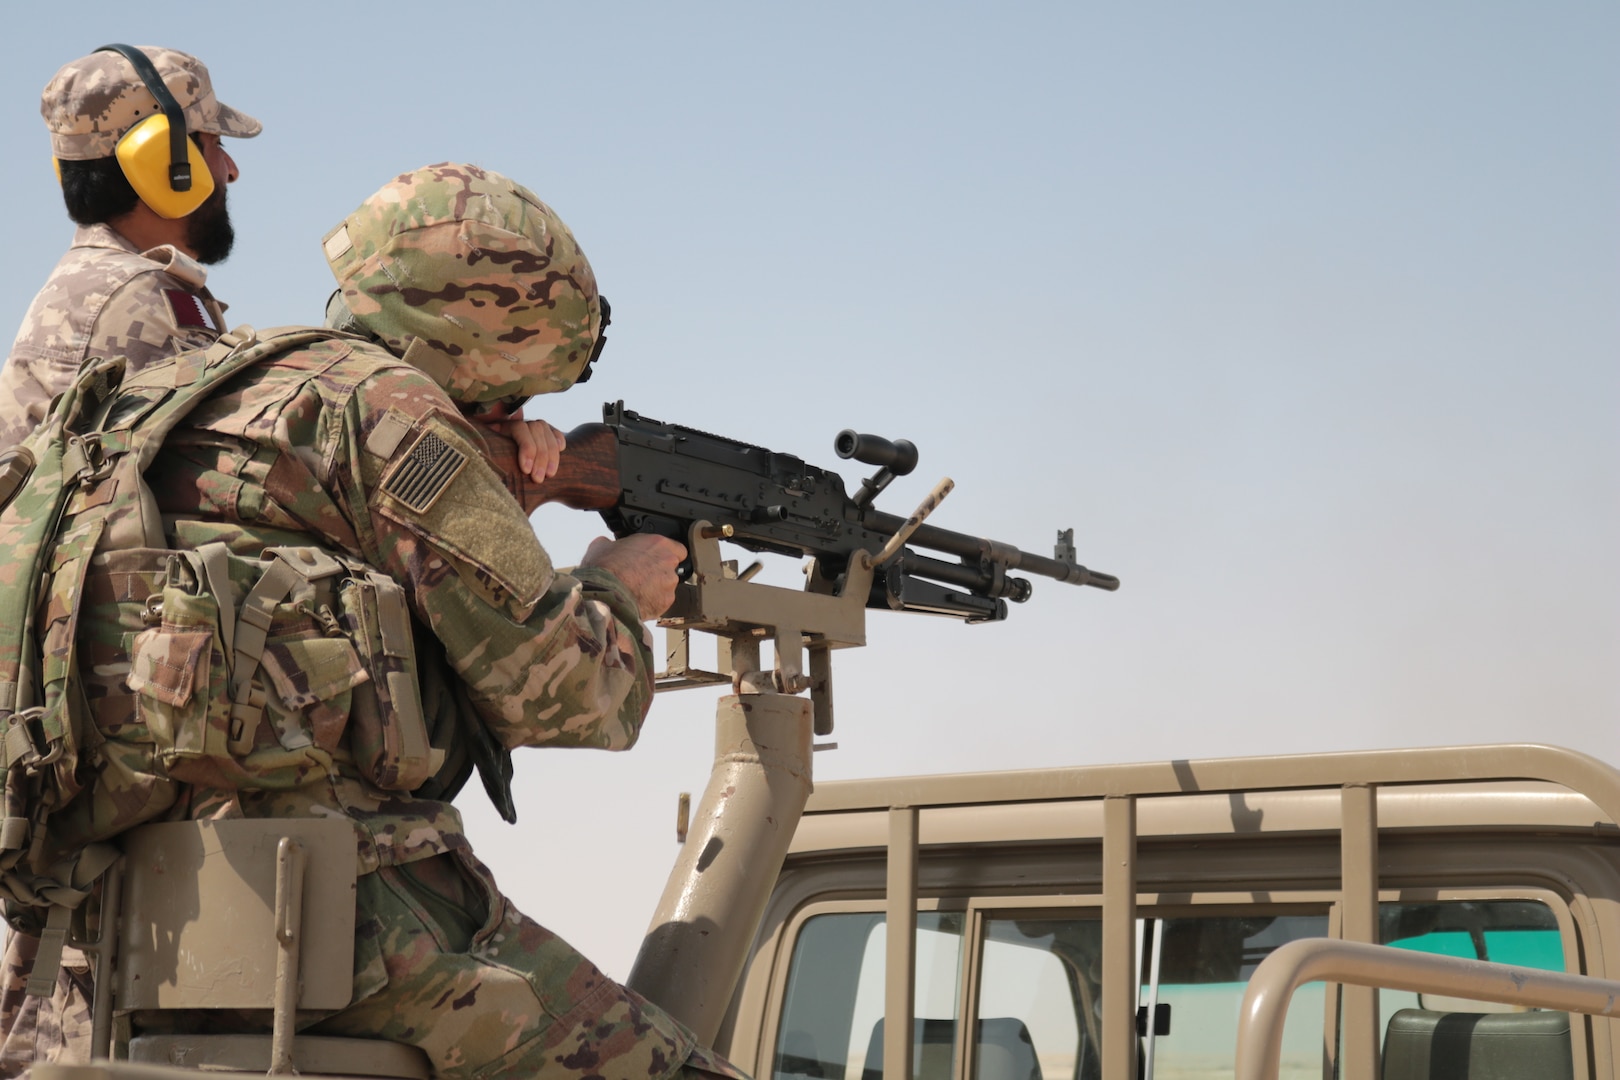 A U.S. Soldier with the 578th Brigade Engineer Battalion fires down range as a Qatari safety observes his target at Al-Ghalail range, Sep. 12, 2018. The range provided a unique opportunity for Soldiers to build rapport with the Qatari soldiers from a Qatari base near Camp As Sayliyah. (U.S. Army photo by 1st. Lt. Stefan Tenorio)